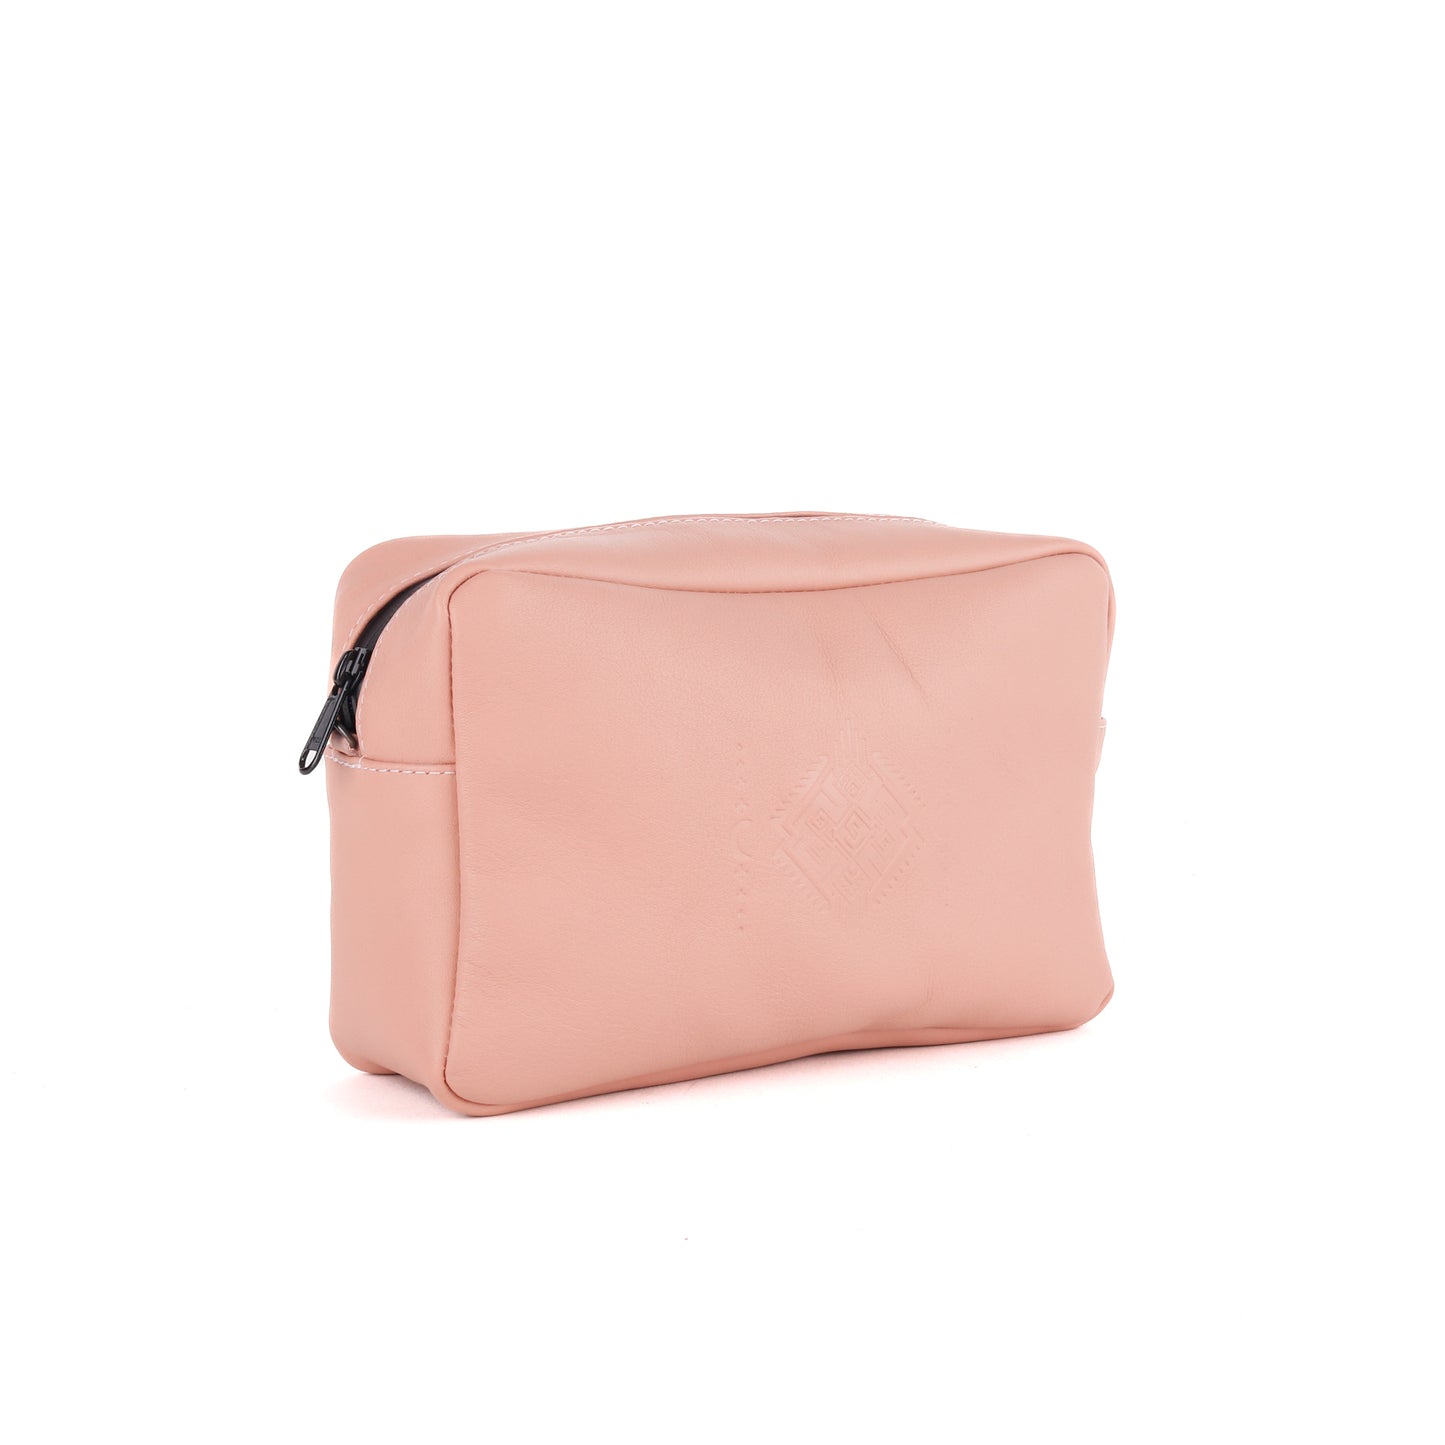 THE PERFECT WET BAG - SMALL - BREAST CANCER AWARENESS CAPSULE - FULL LEATHER - ROSE PINK